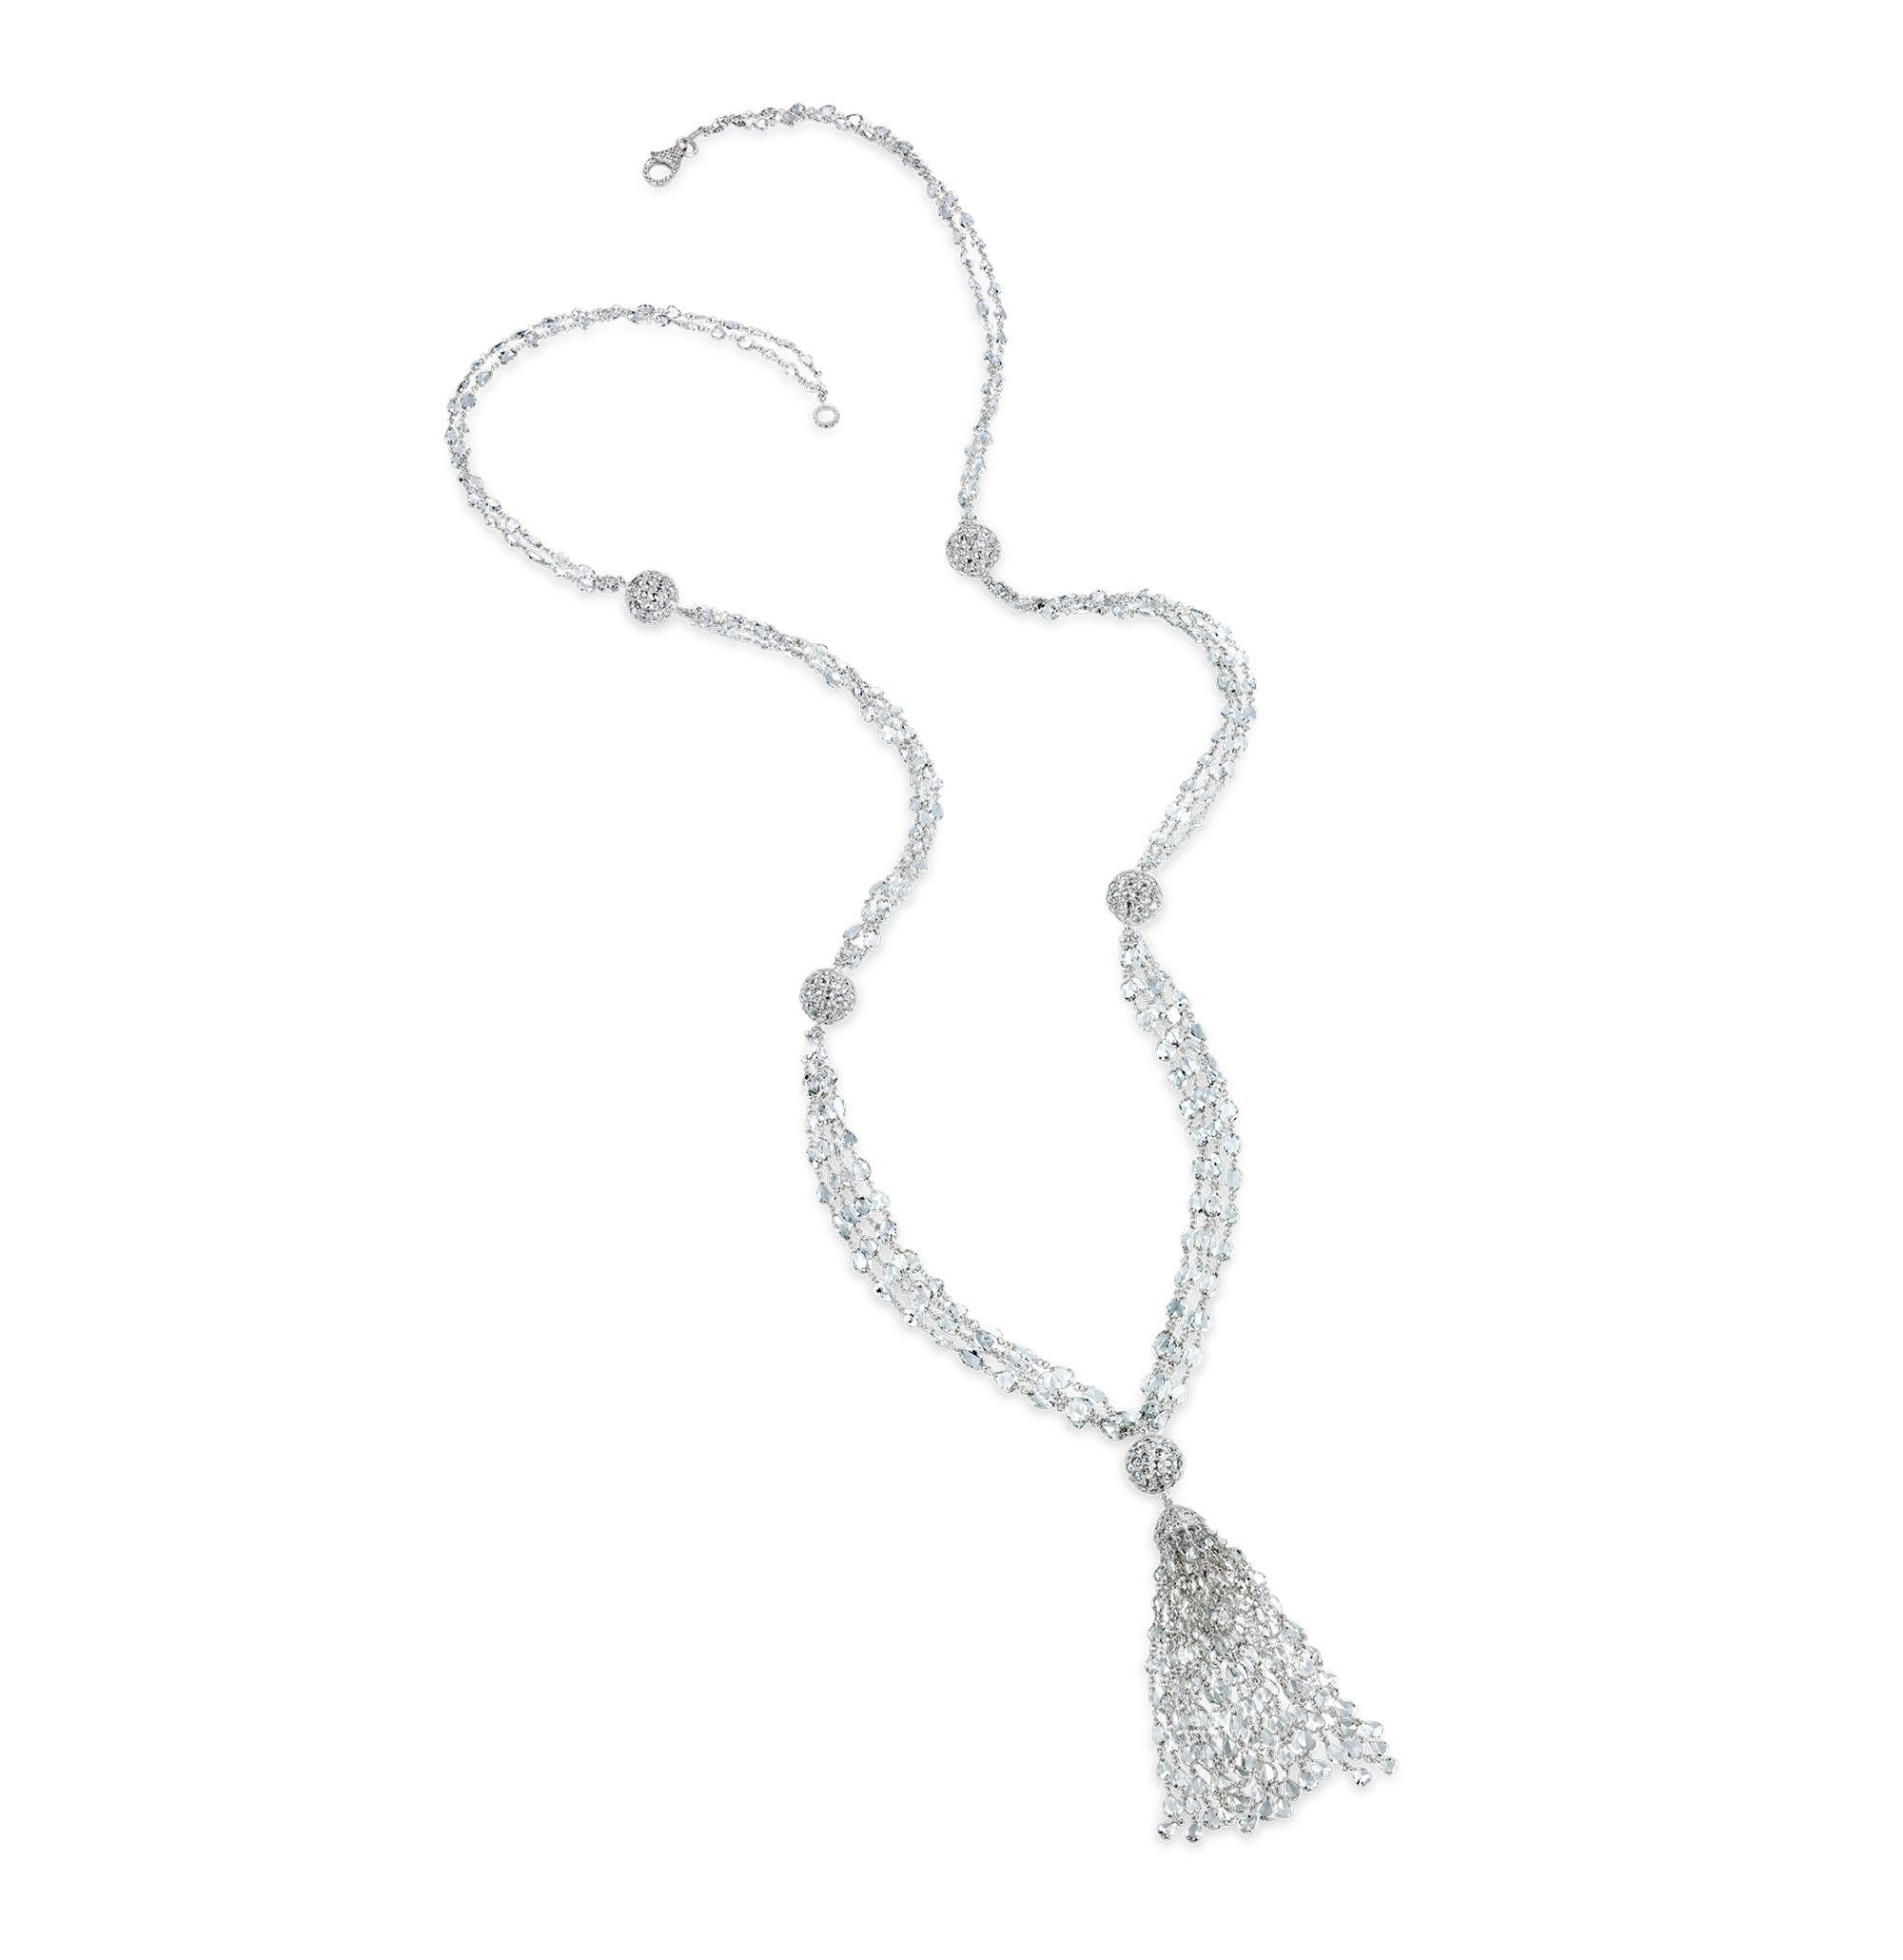 This exquisite diamond tassel necklace, with a total carat weight of 53.94, is a masterpiece of timeless elegance and craftsmanship. It features a meticulously designed chain of mixed shape rose cut diamonds, punctuated by five spheres of diamonds,